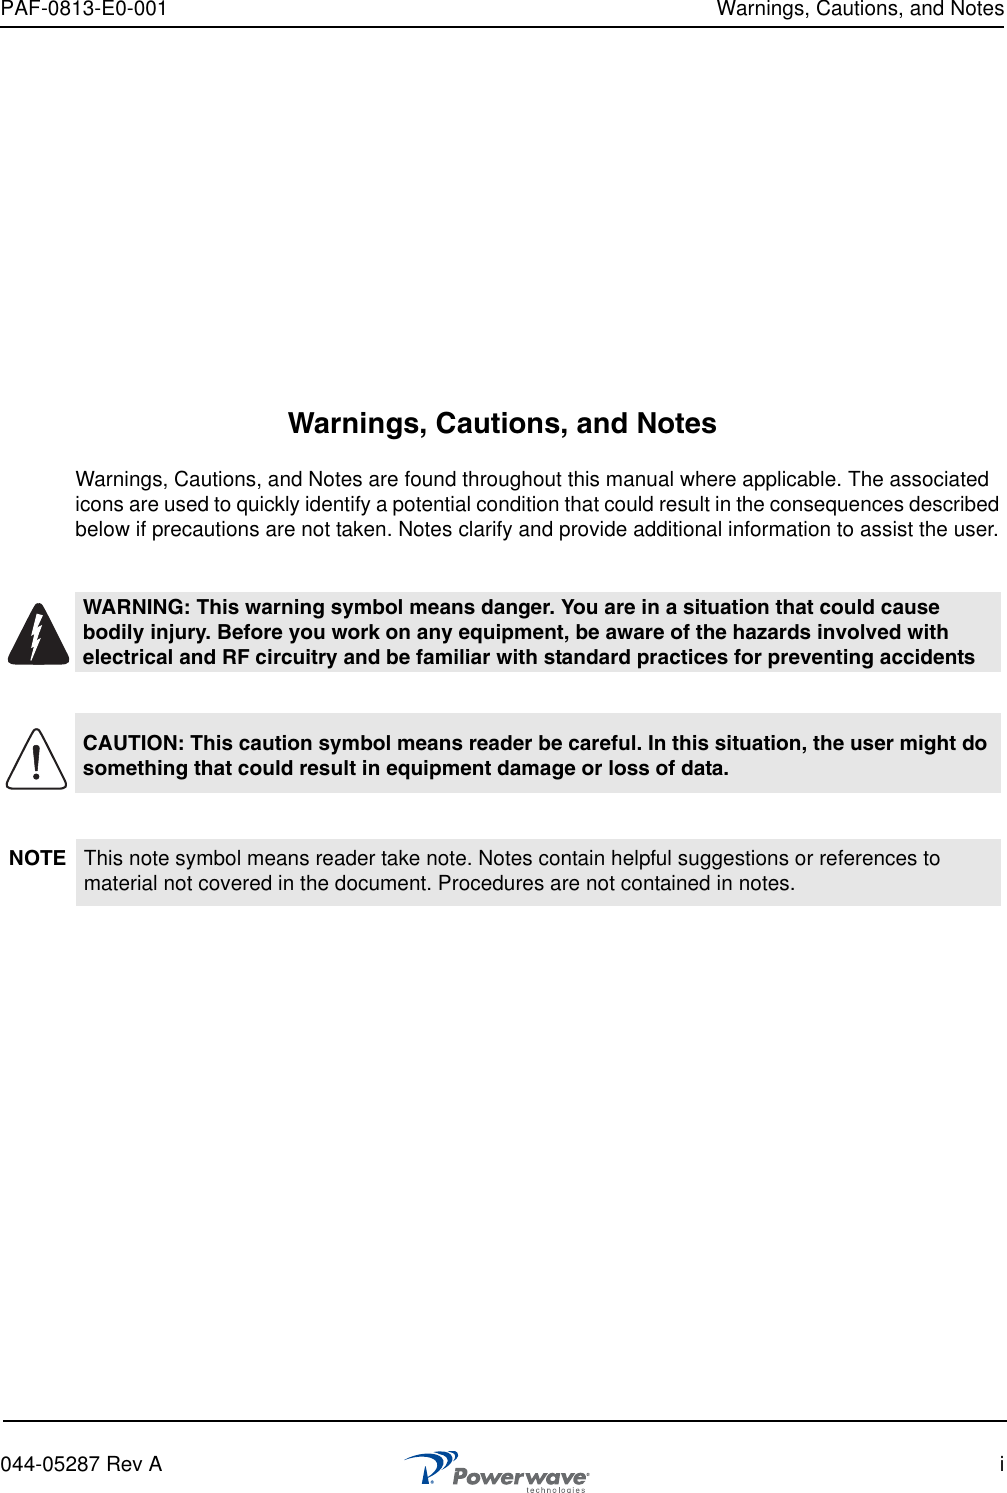 PAF-0813-E0-001 Warnings, Cautions, and Notes044-05287 Rev A iWarnings, Cautions, and NotesWarnings, Cautions, and Notes are found throughout this manual where applicable. The associated icons are used to quickly identify a potential condition that could result in the consequences described below if precautions are not taken. Notes clarify and provide additional information to assist the user.WARNING: This warning symbol means danger. You are in a situation that could cause bodily injury. Before you work on any equipment, be aware of the hazards involved with electrical and RF circuitry and be familiar with standard practices for preventing accidentsCAUTION: This caution symbol means reader be careful. In this situation, the user might do something that could result in equipment damage or loss of data.NOTE This note symbol means reader take note. Notes contain helpful suggestions or references to material not covered in the document. Procedures are not contained in notes. 